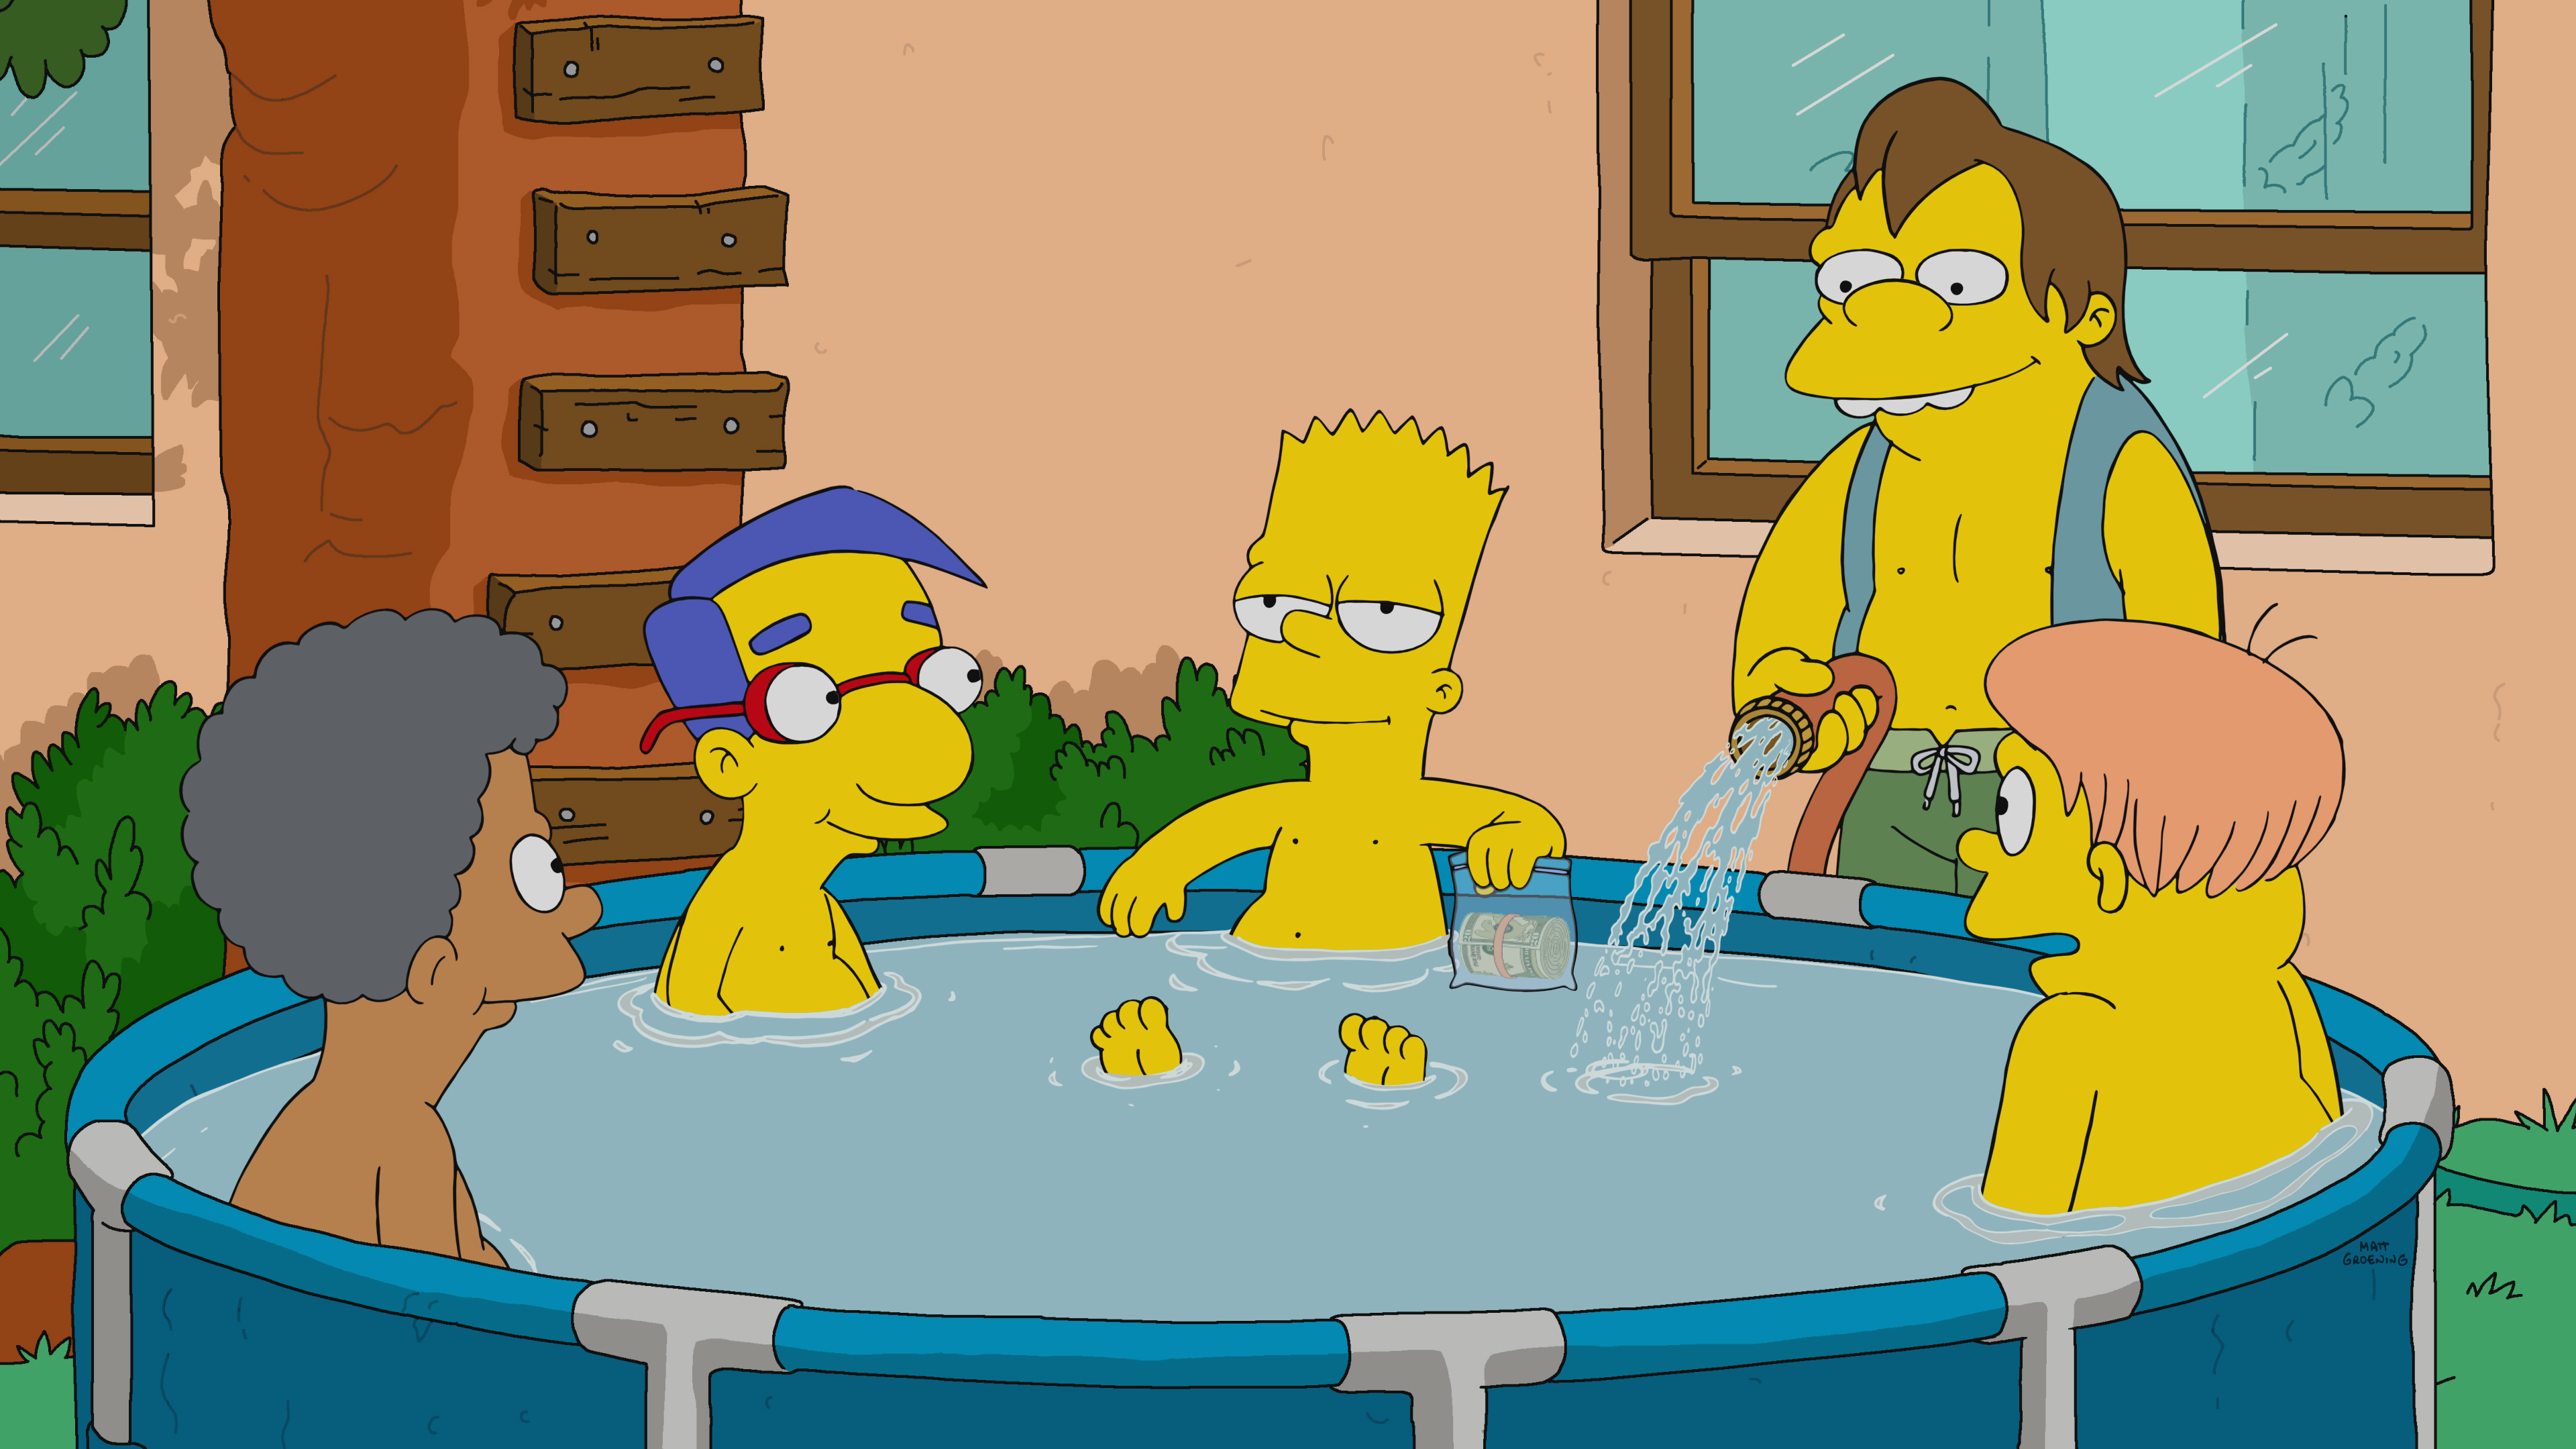 The Simpsons: Nelson Muntz fills the pool with water